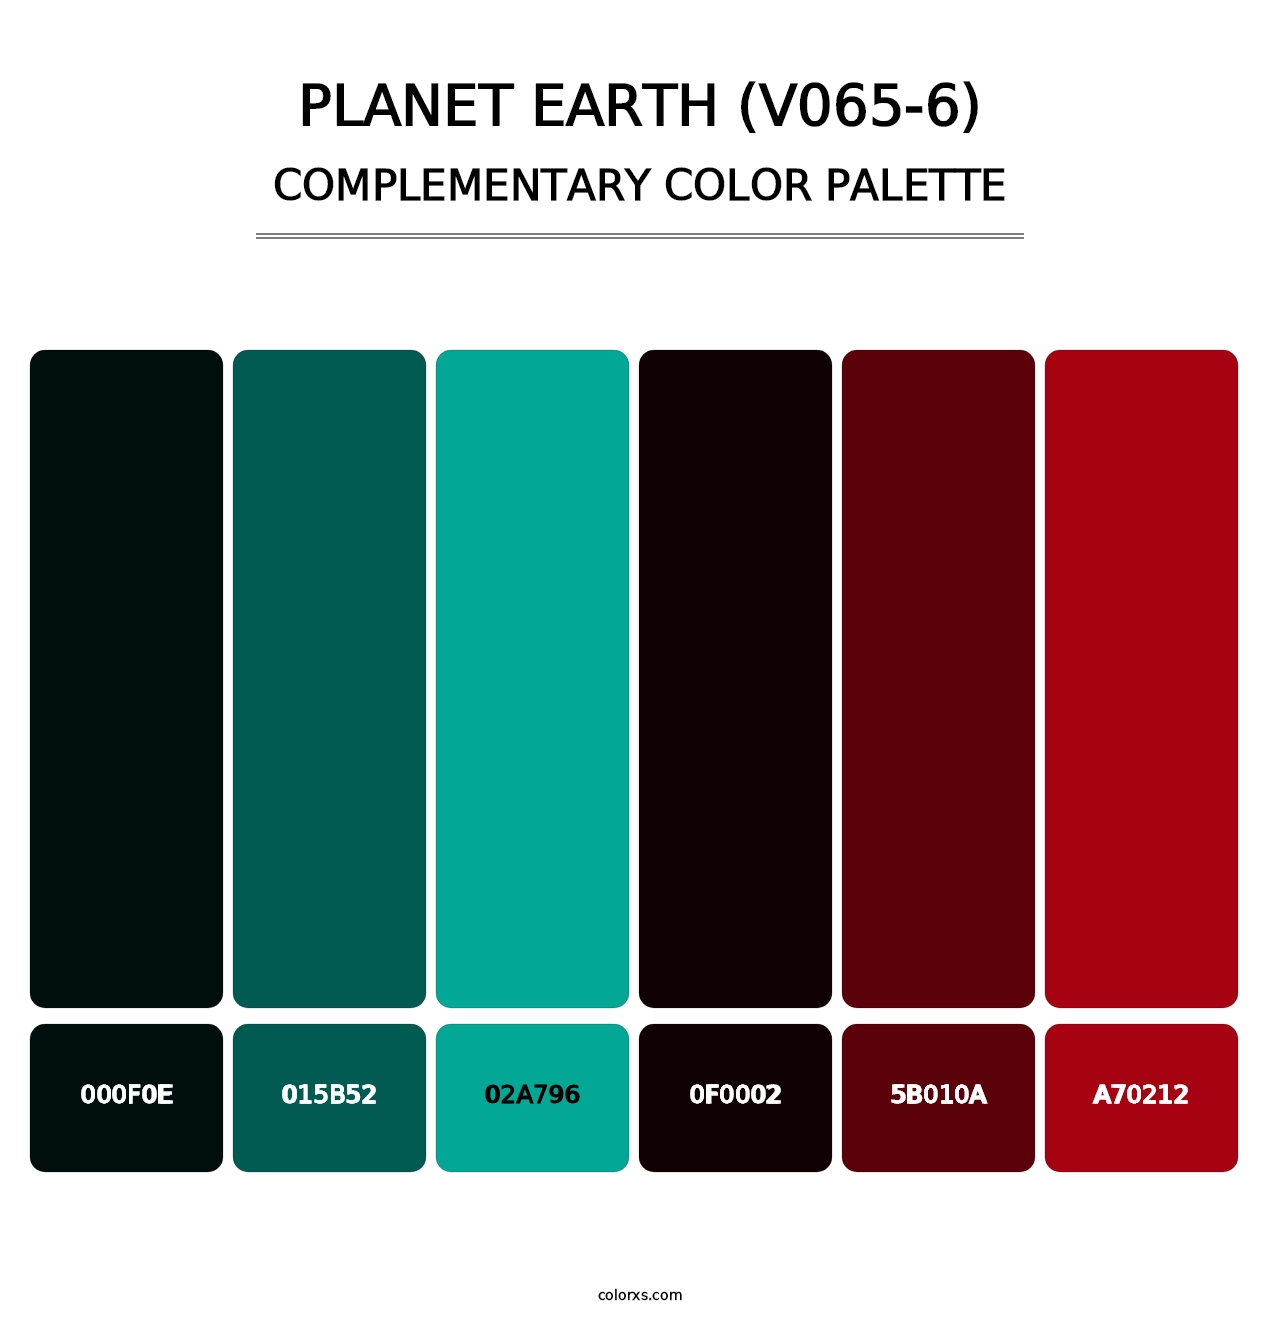 Planet Earth (V065-6) - Complementary Color Palette